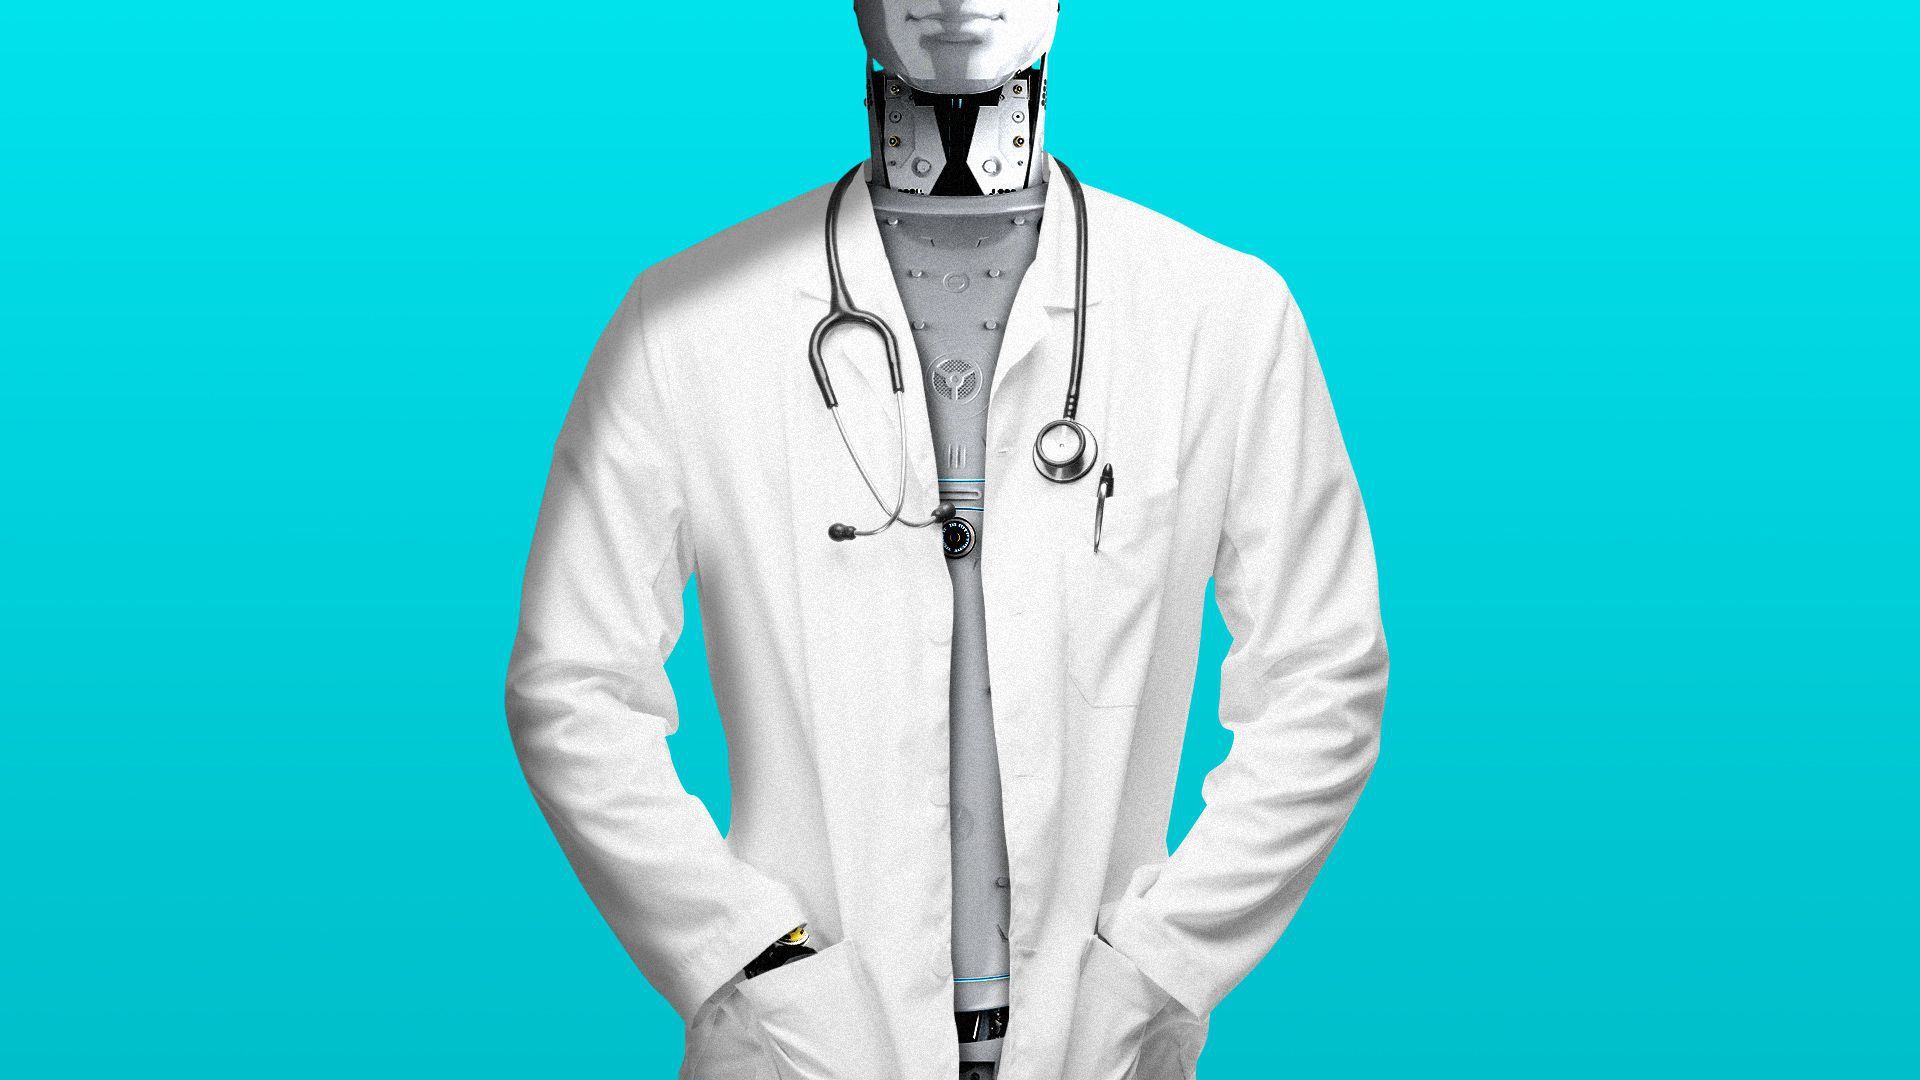 Illustration of a doctor with robotic limbs. 